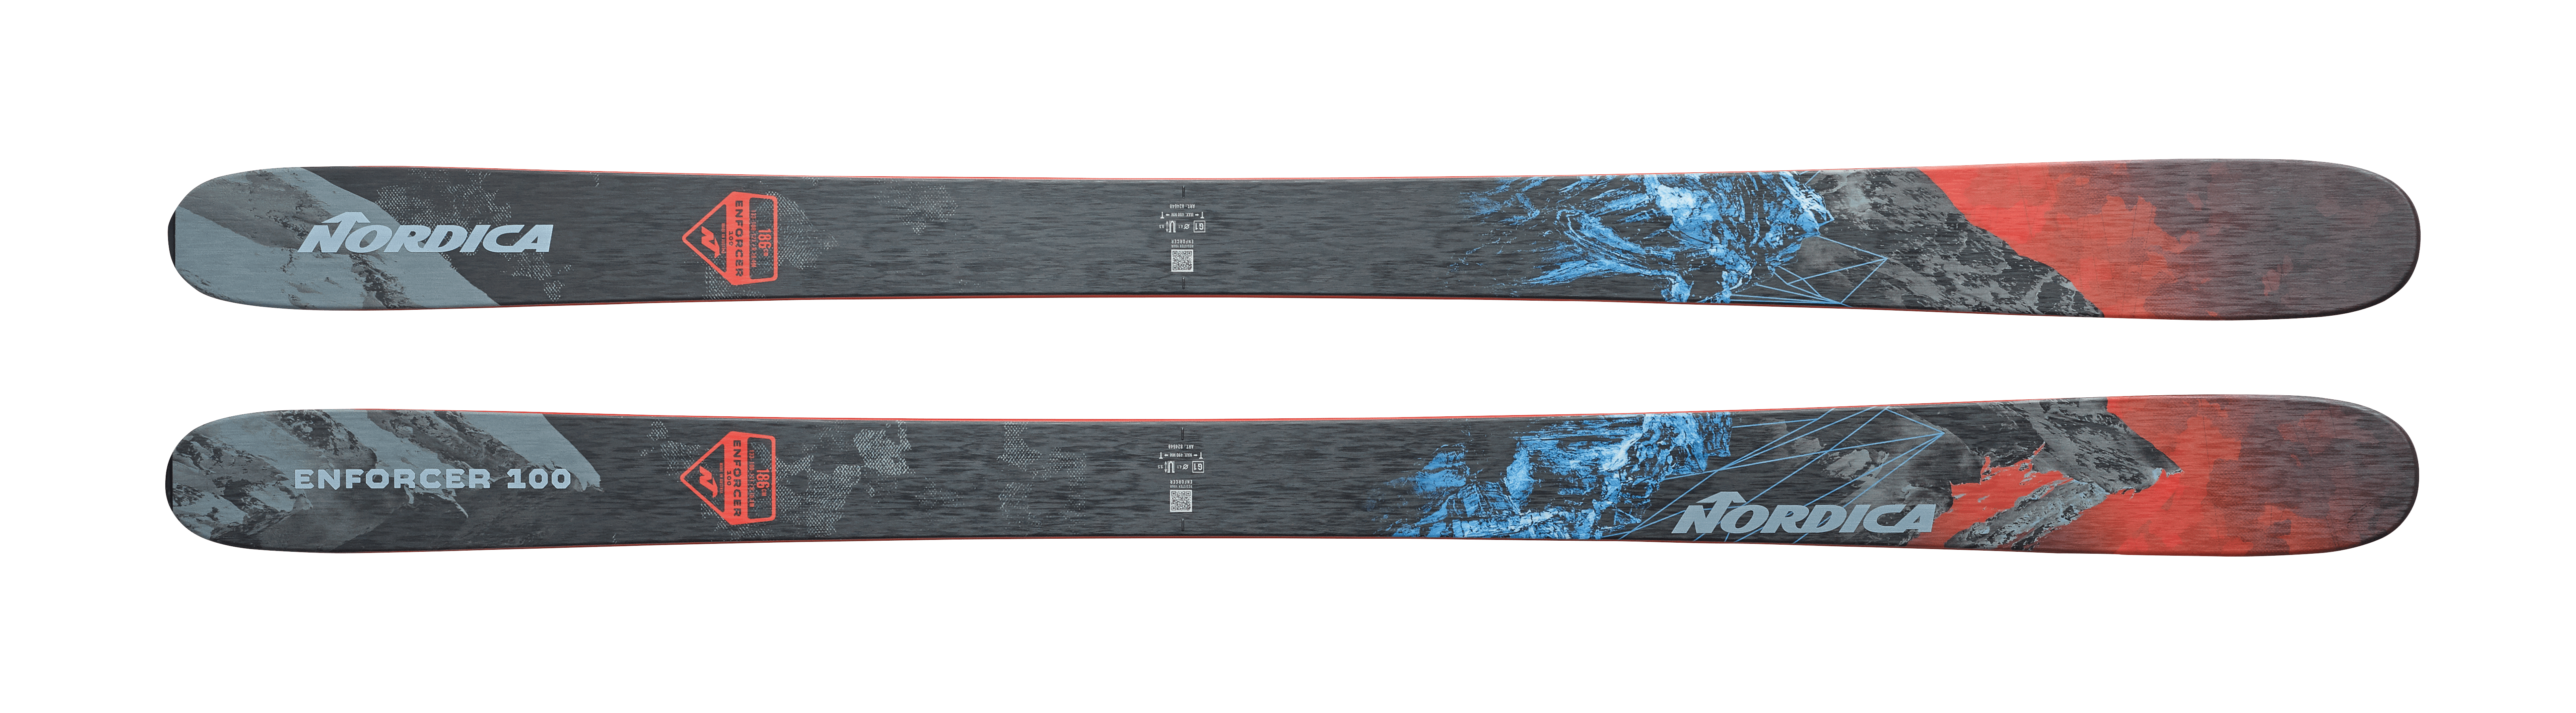 Picture of the Nordica Enforcer 100 skis.